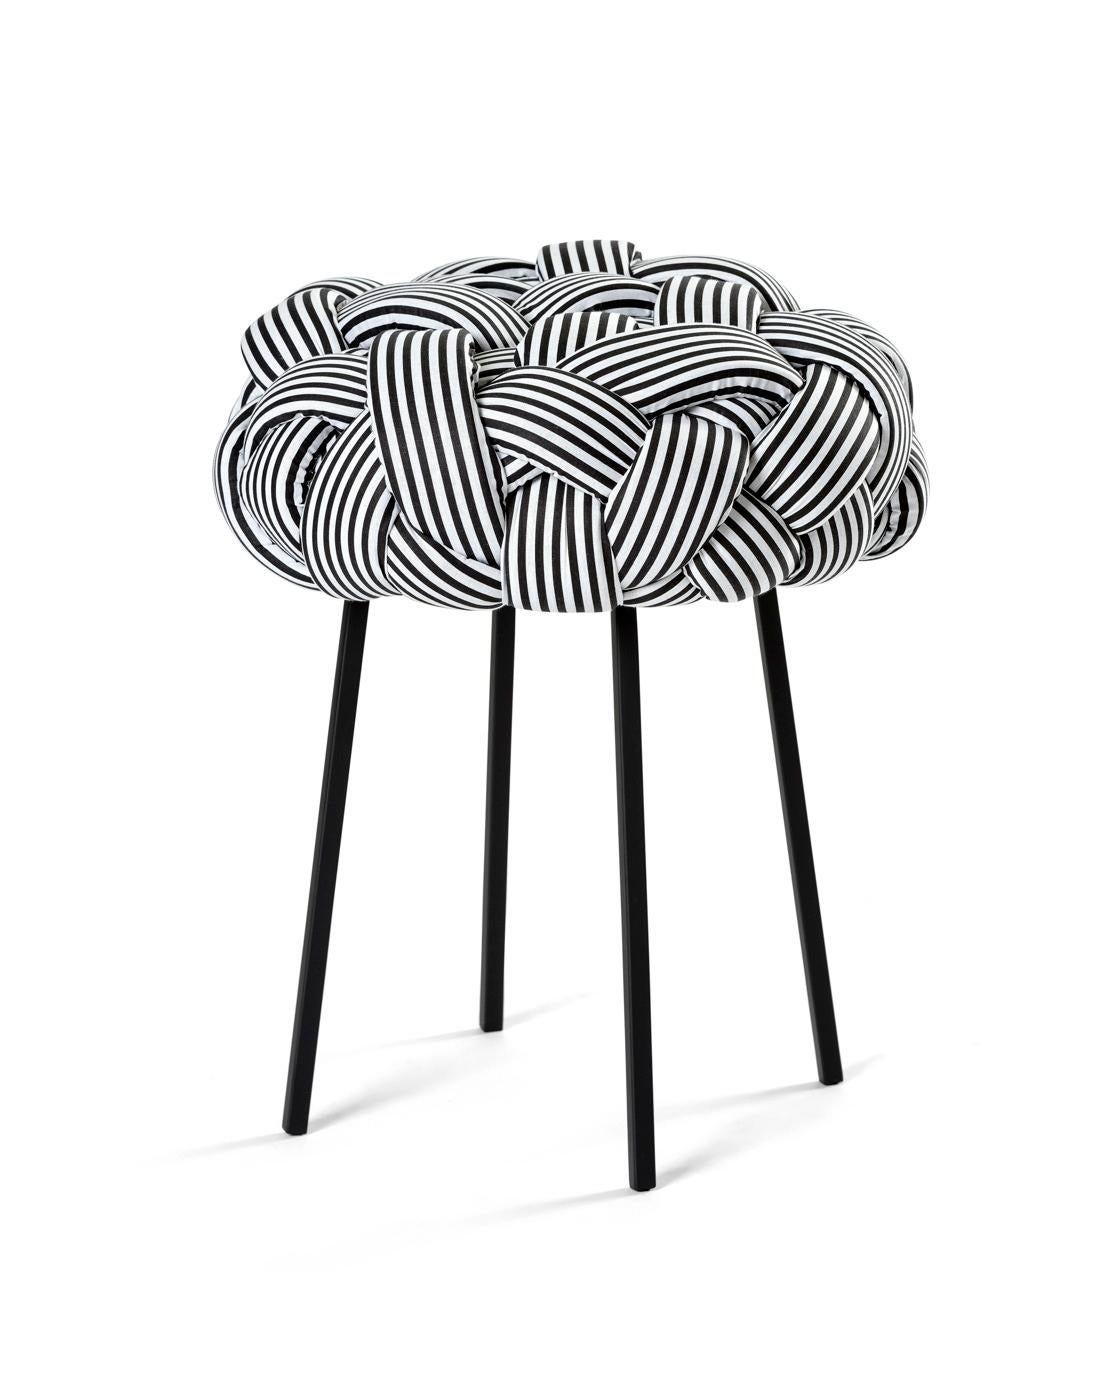 This contemporary stool is part of the Cloud collection, which was created around the concept of trees. These contemporary stools and benches are made with cotton fabric and foam stripes, woven and stitched by hand. Each piece is unique, as the